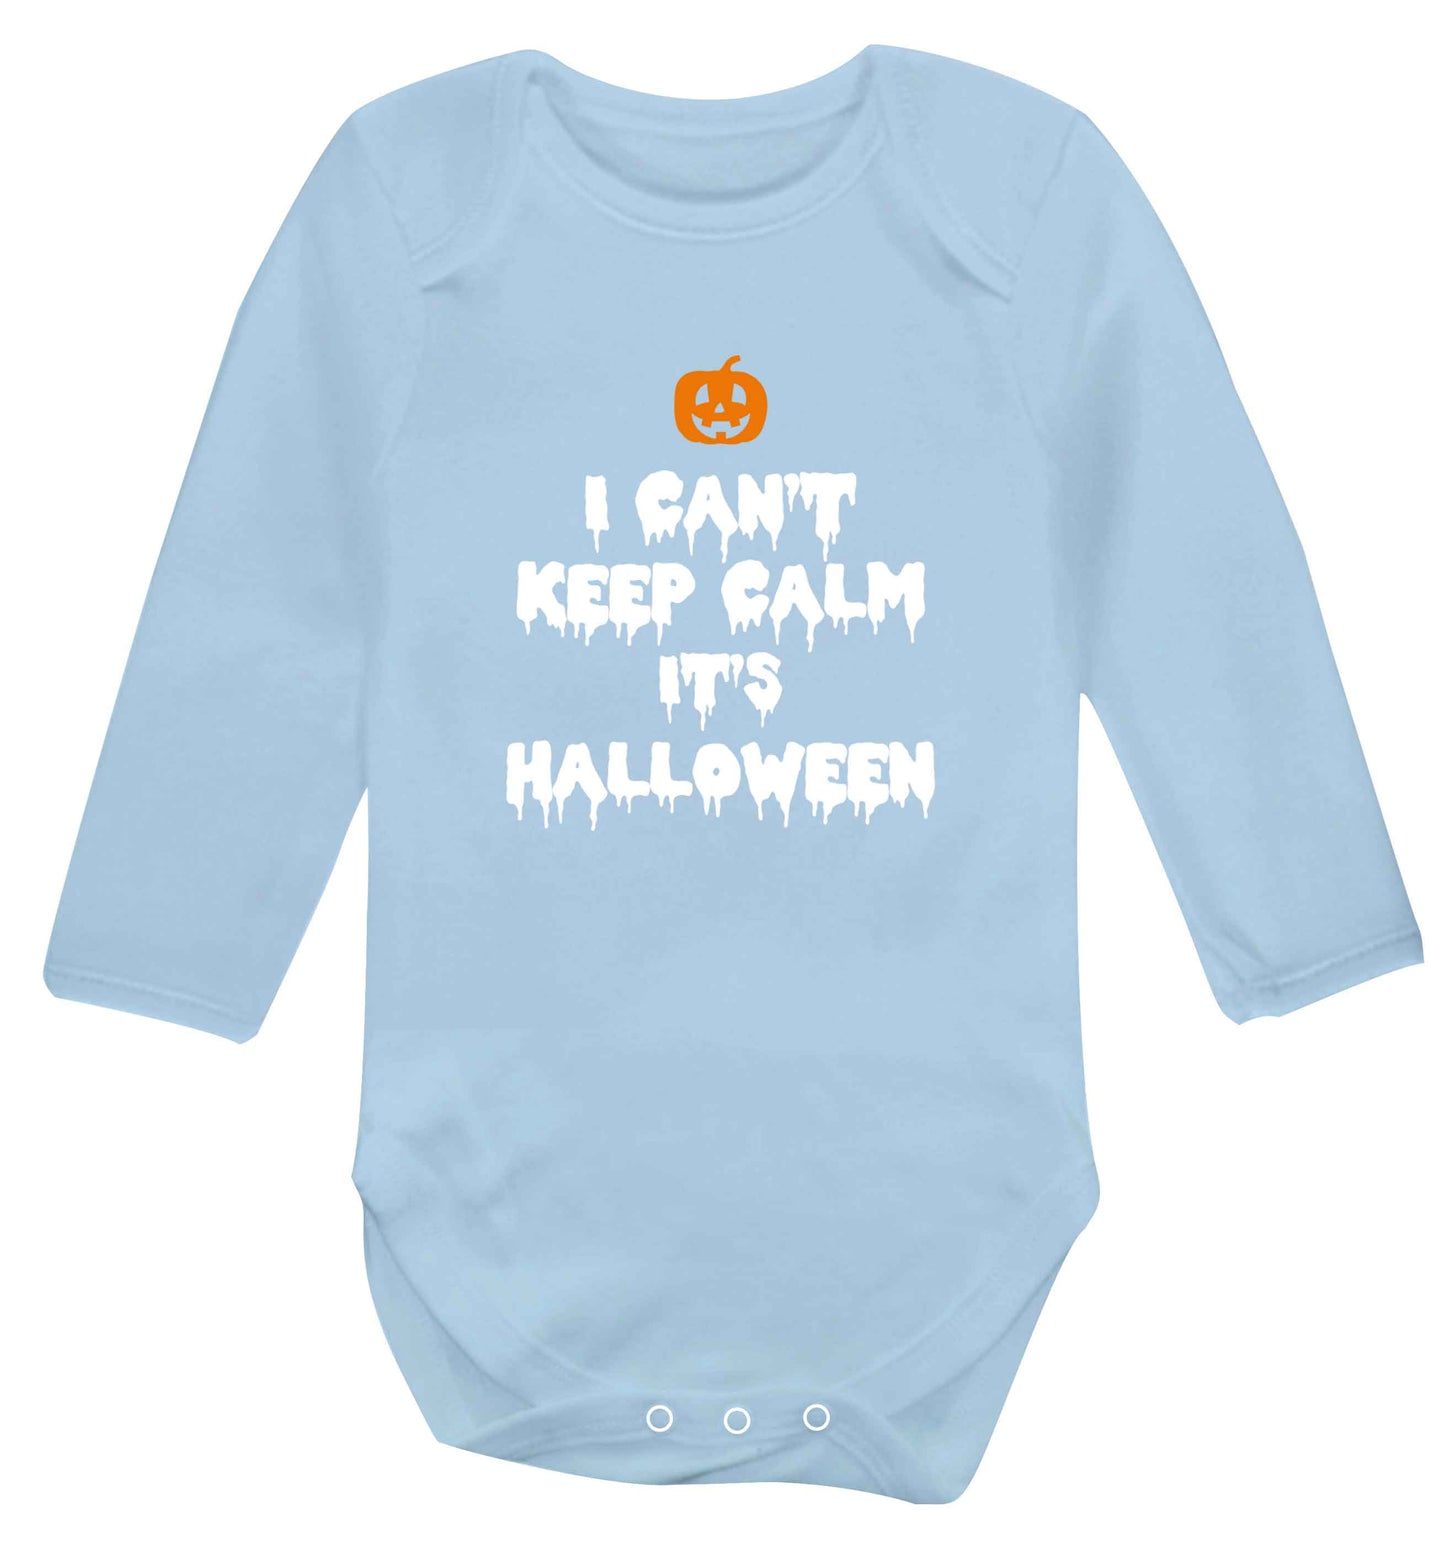 I can't keep calm it's halloween baby vest long sleeved pale blue 6-12 months